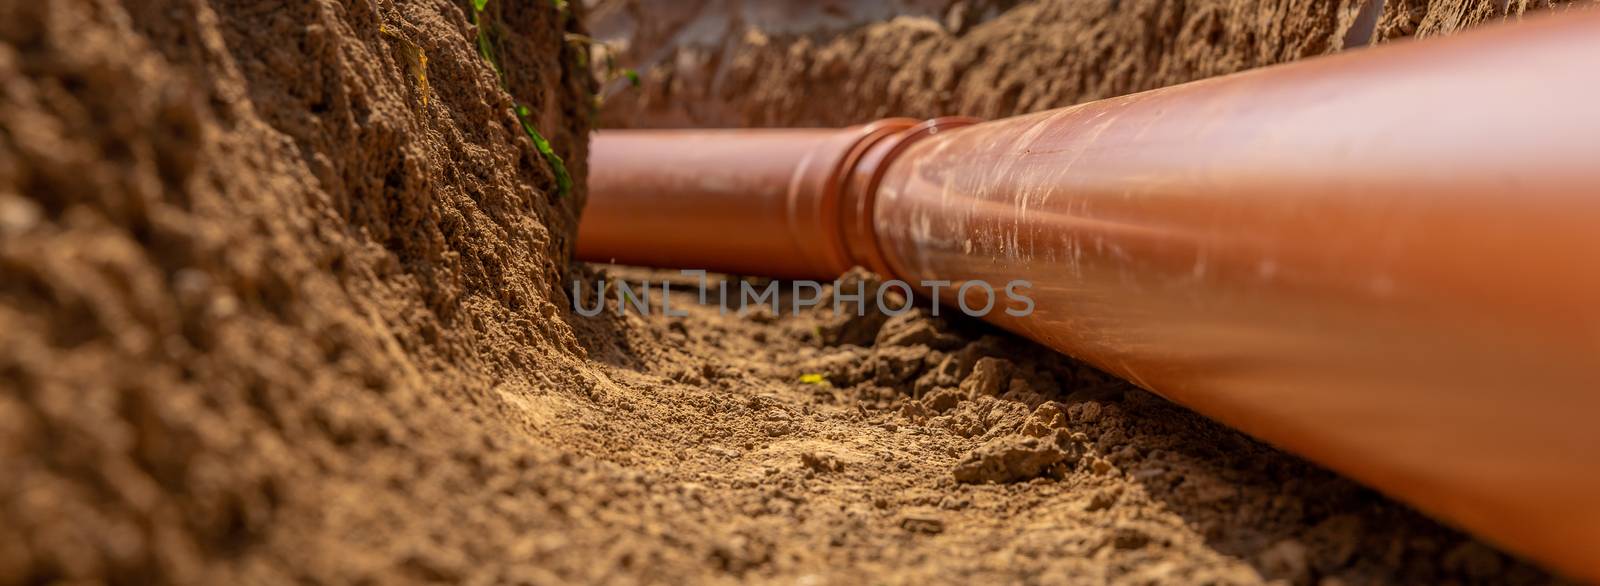 Plastic pipes in the ground during the construction of a building